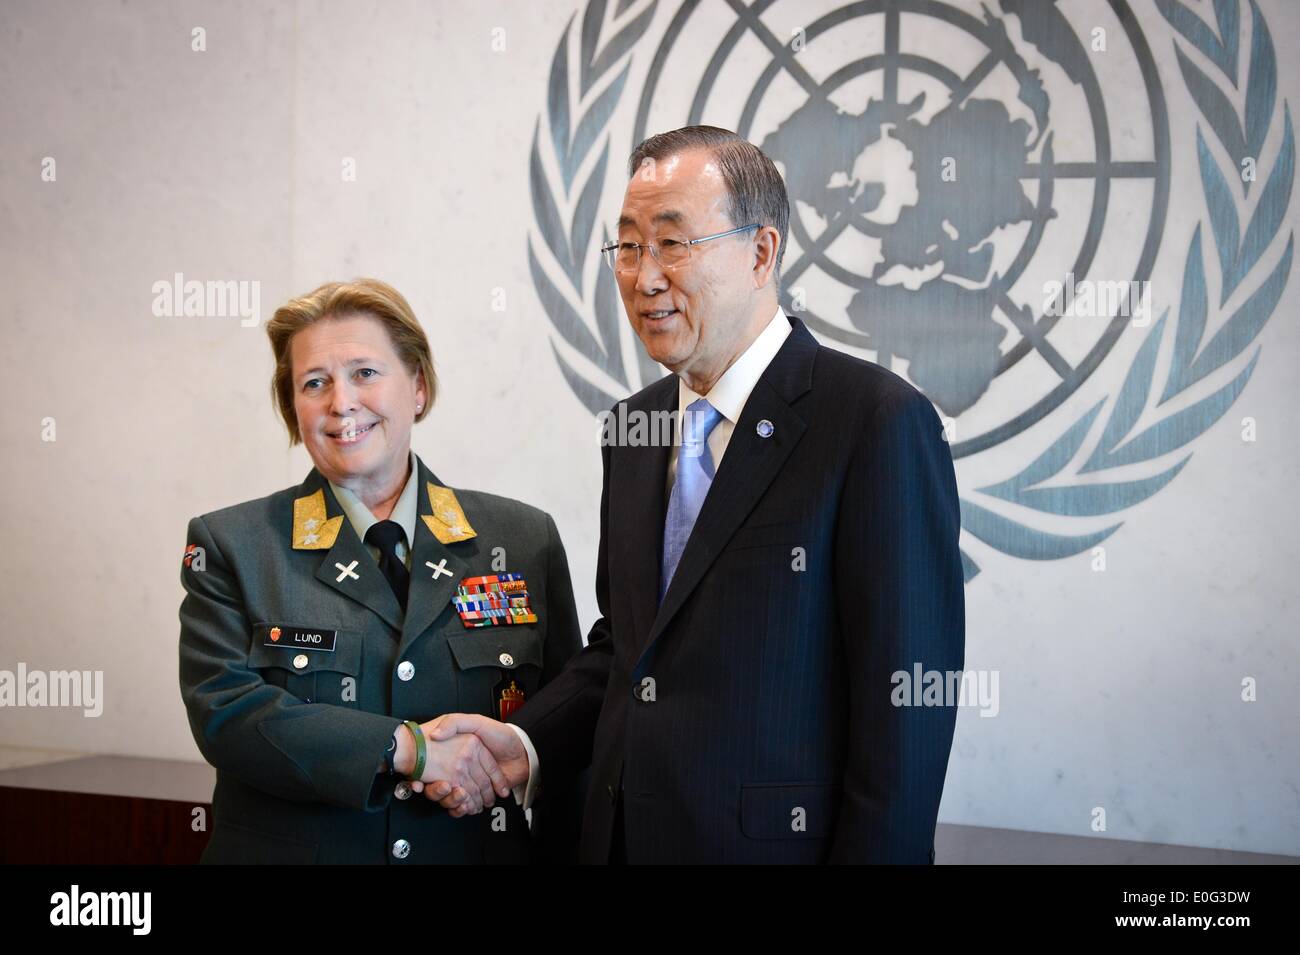 New York, UN headquarters in New York. 12th May, 2014. Major General Kristin Lund (L) shakes hands with United Nations Secretary-General Ban Ki-moon during a photo opportunity after she was appointed as the commander of the UN peacekeeping force in Cyprus, at the UN headquarters in New York, on May 12, 2014. UN chief Ban Ki-moon on Monday named Major General Kristin Lund to take command of the UN peacekeeping force in Cyprus. The Norwegian commander will be the first female to command a UN force. © Niu Xiaolei/Xinhua/Alamy Live News Stock Photo